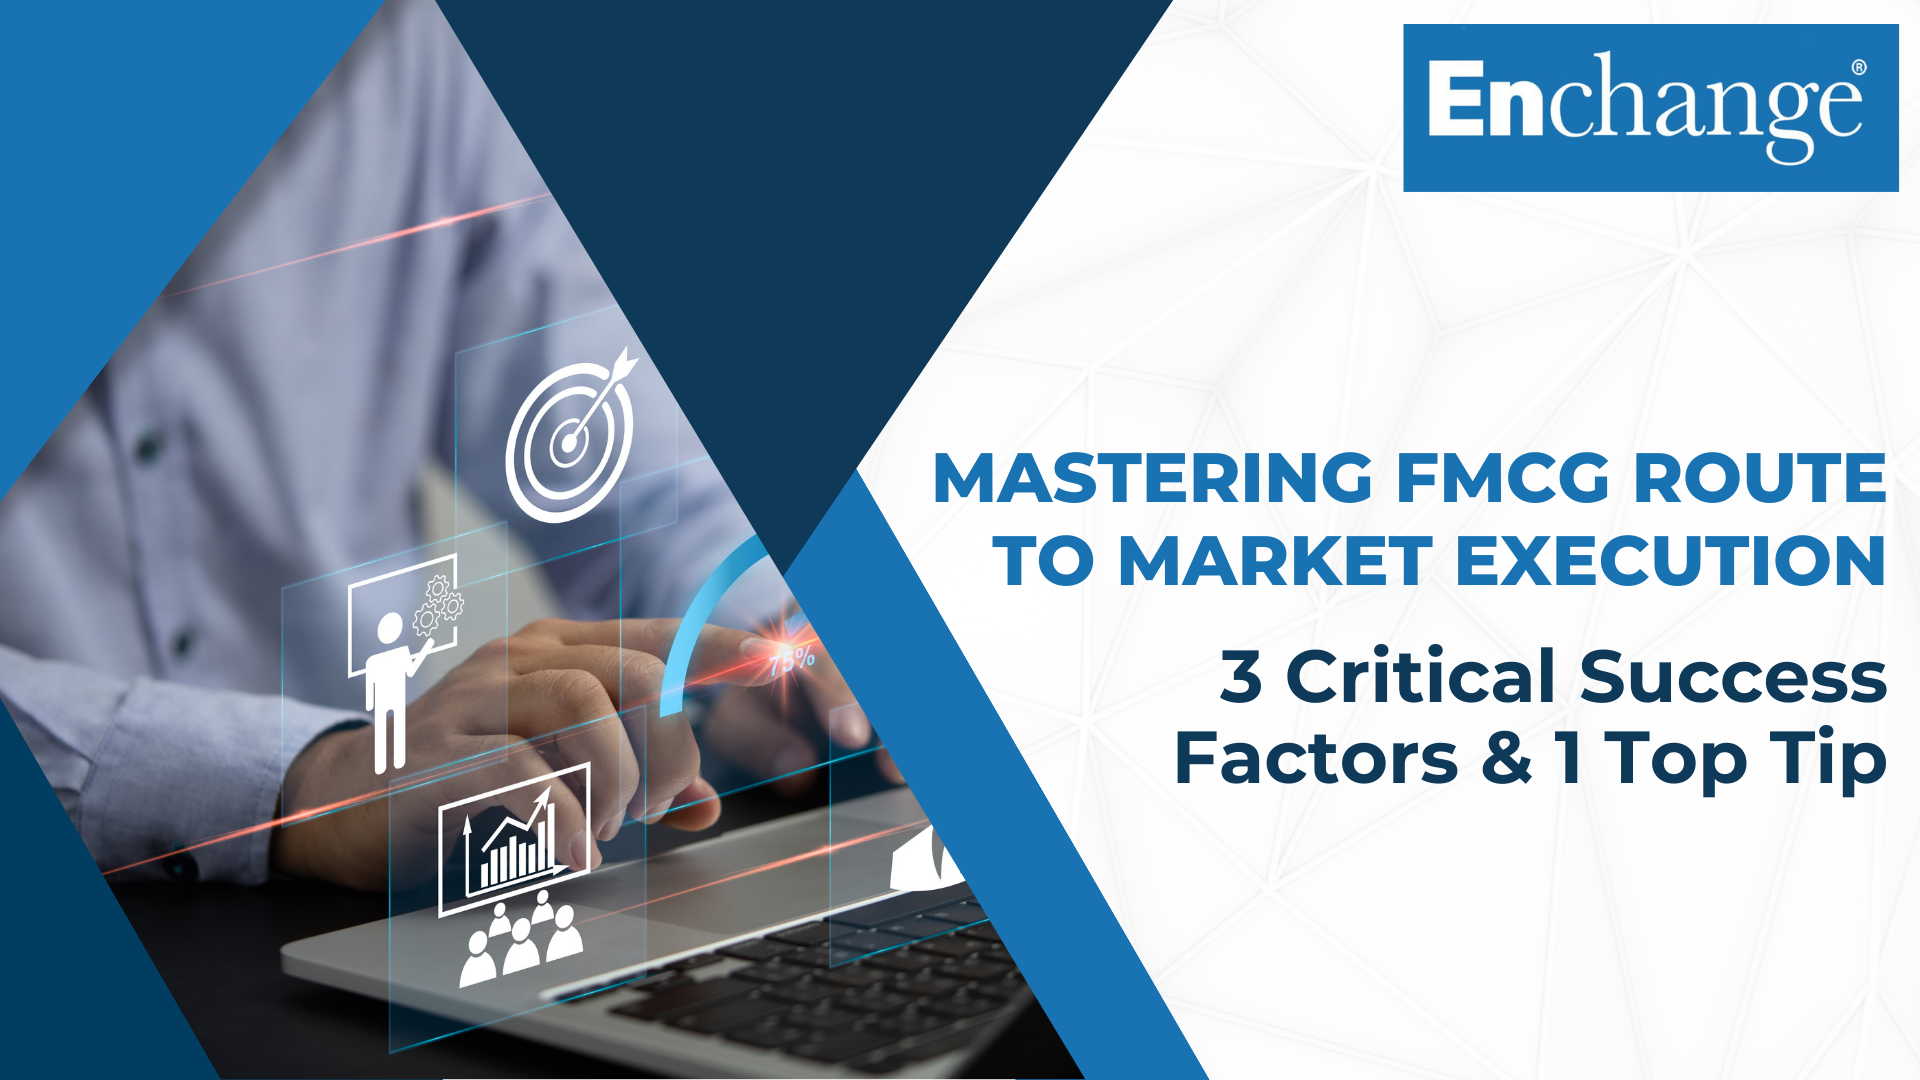 <div>Mastering FMCG Route to Market Execution: 3 Critical Success factors & 1 Top Tip</div>